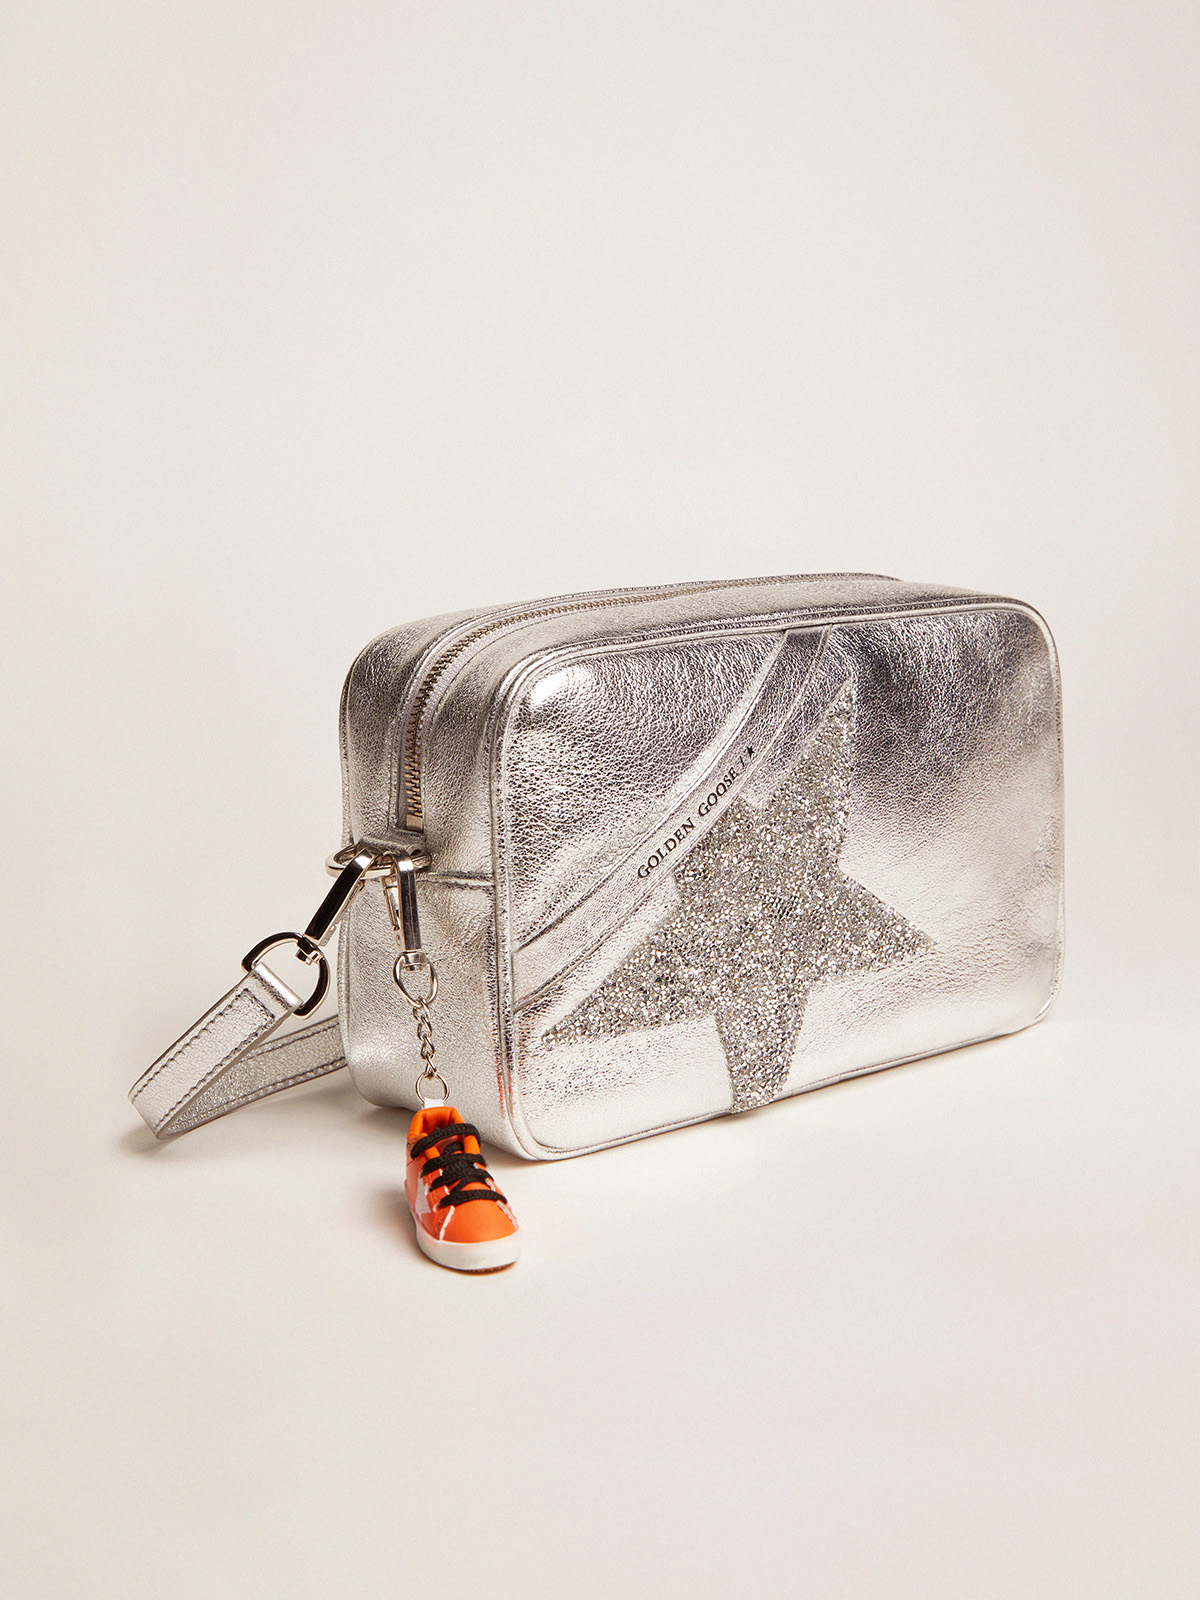 Silver Star Bag made of laminated leather with Swarovski star